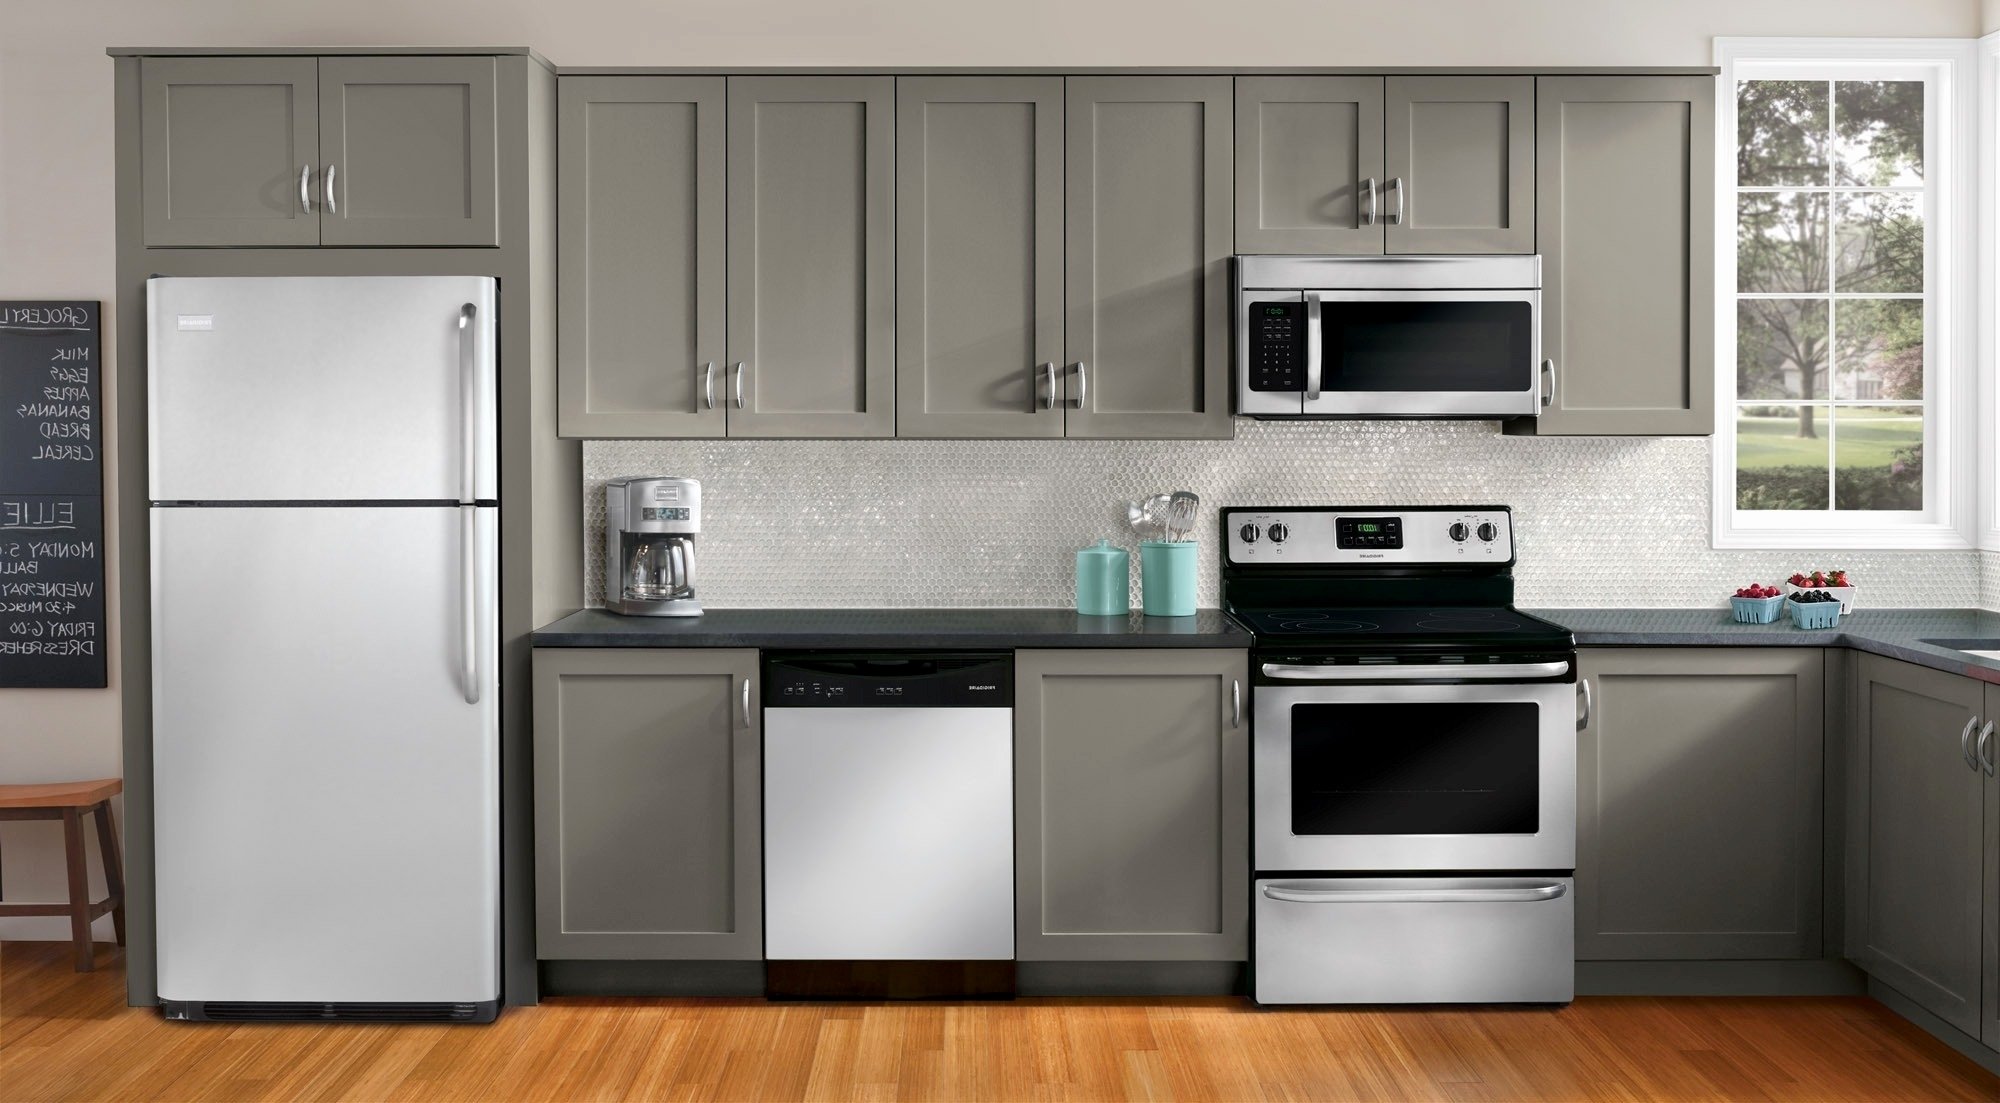 10 Most Recommended Kitchen Ideas With White Appliances 2021